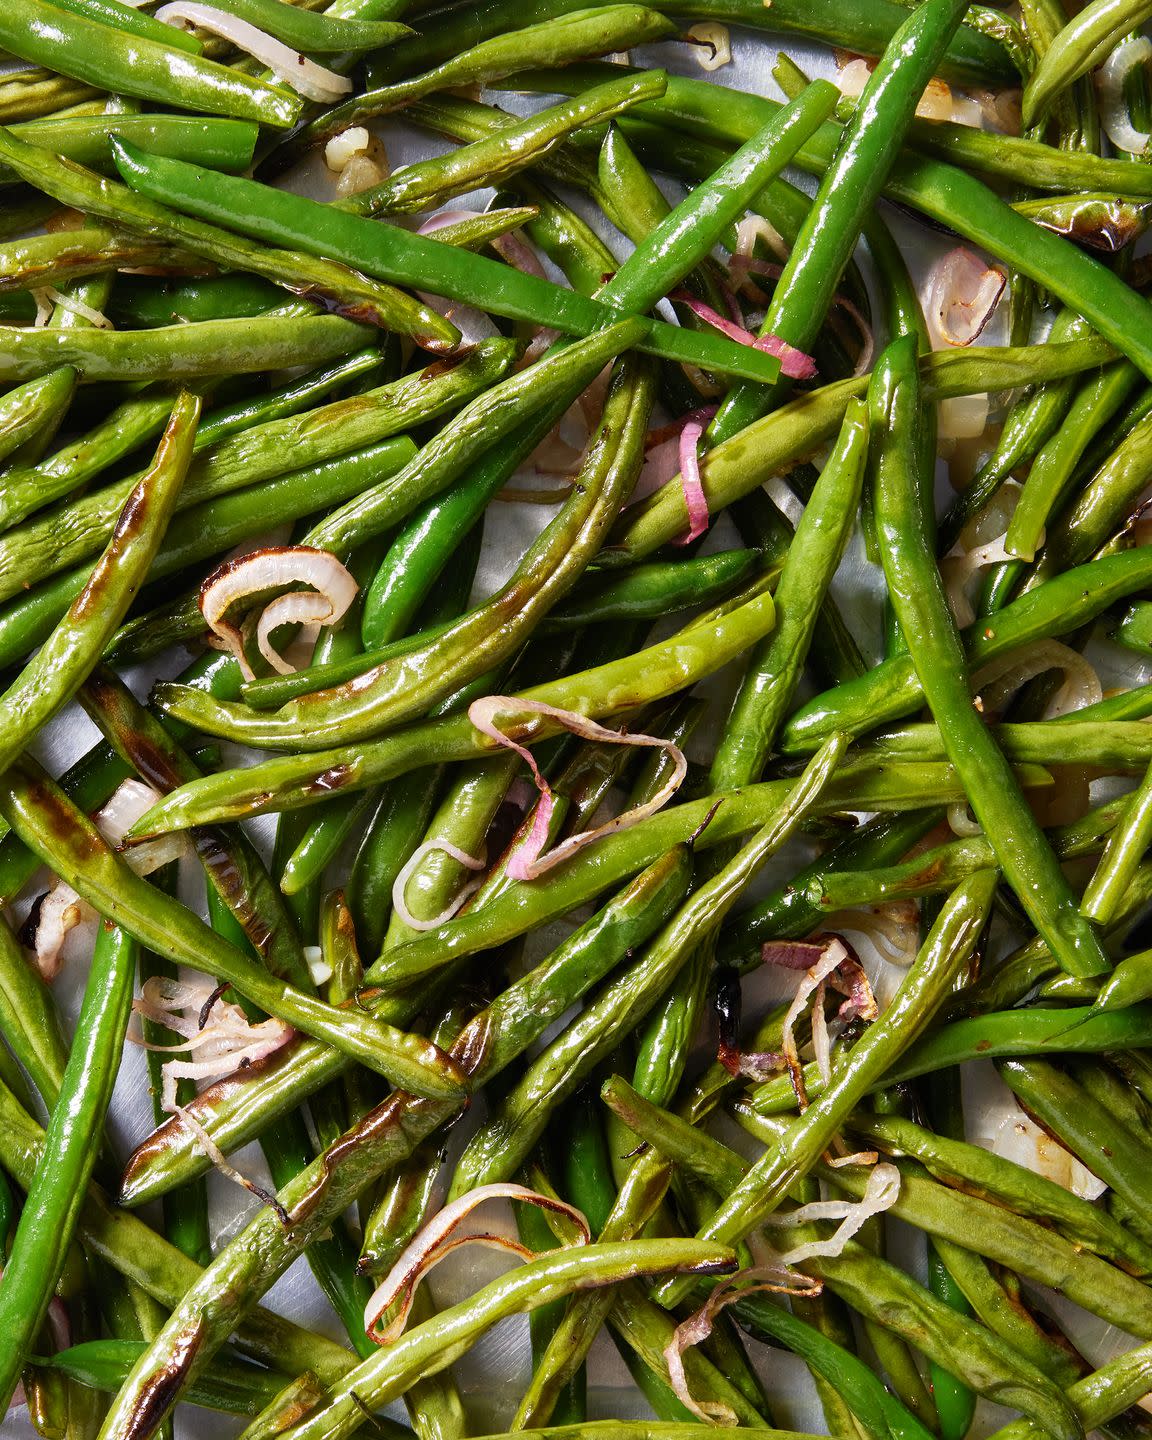 fresh green beans tossed with olive oil and shallots, then roasted until tender and lightly blistered